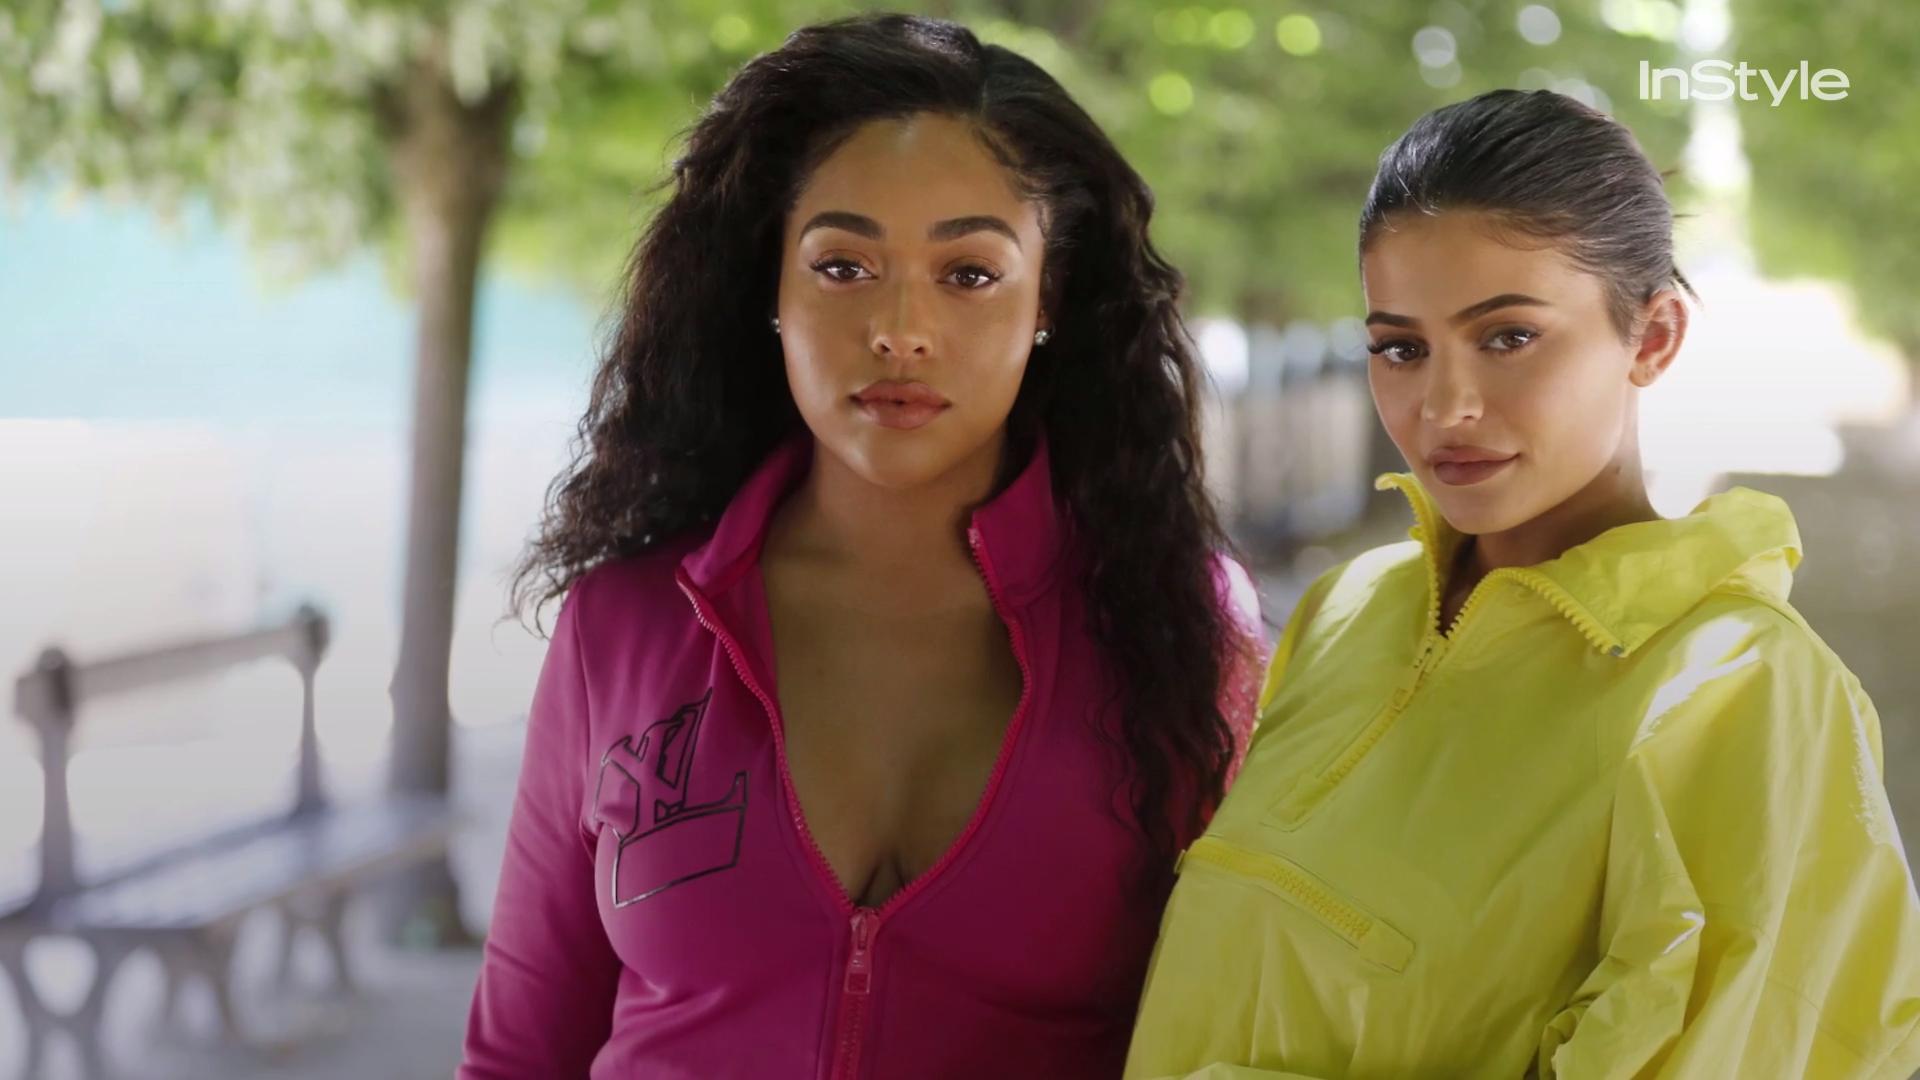 Jordyn Woods Just Opened Up About How Real Things Have Been Instyle